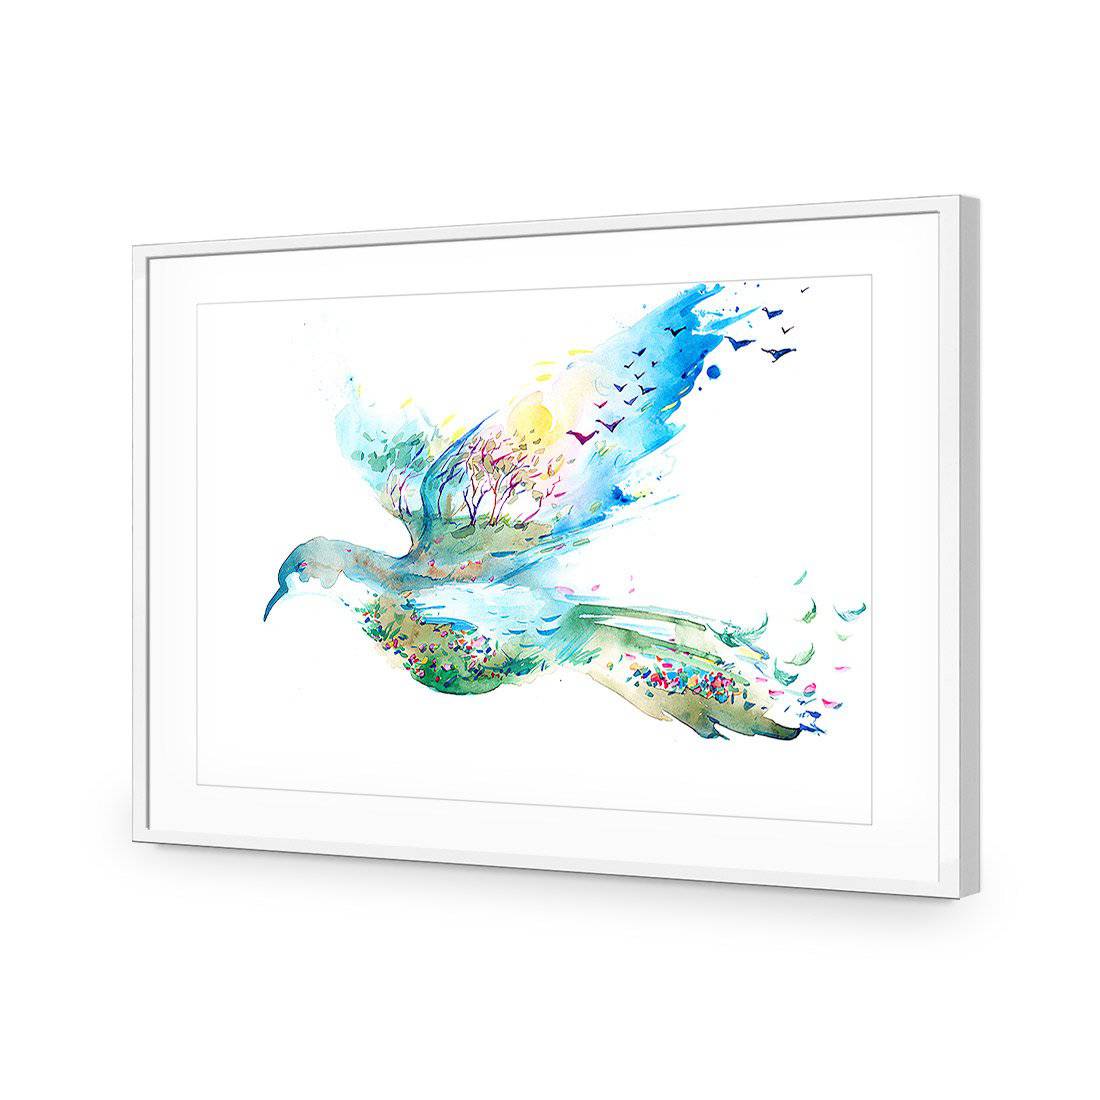 Dove Of Peace-Acrylic-Wall Art Design-With Border-Acrylic - White Frame-45x30cm-Wall Art Designs